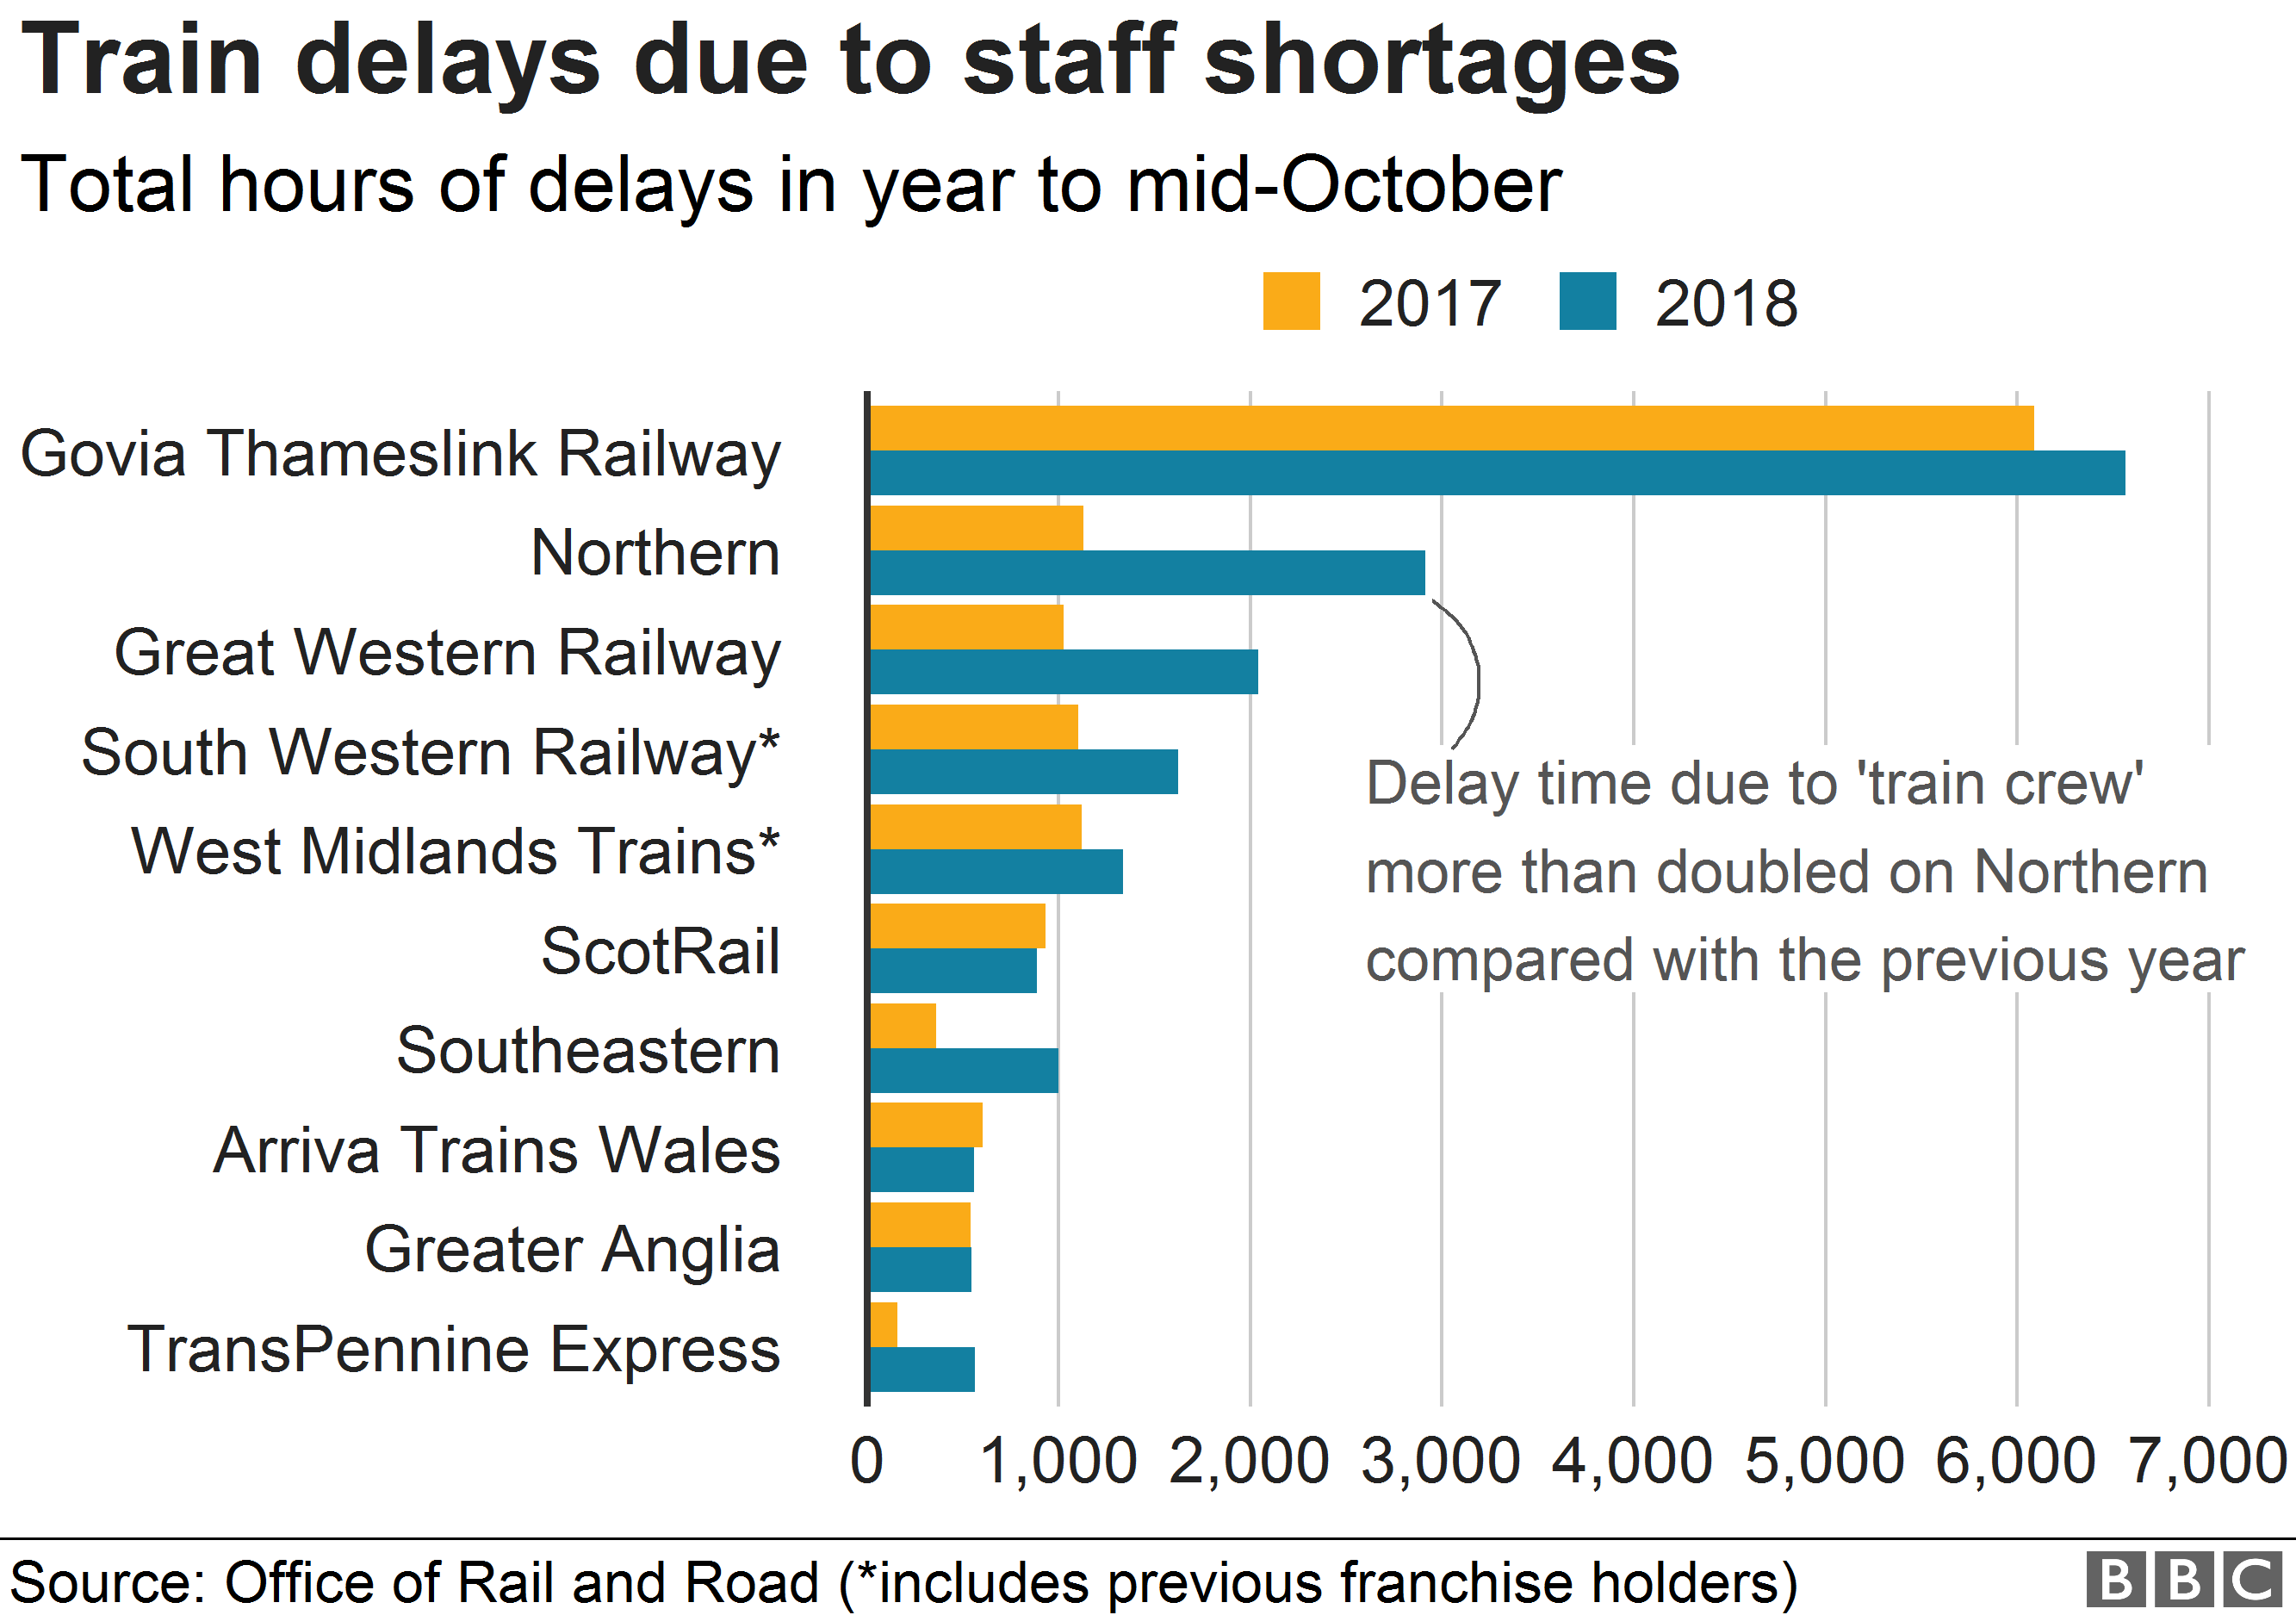 Chart showing rail delays due to staff shortages